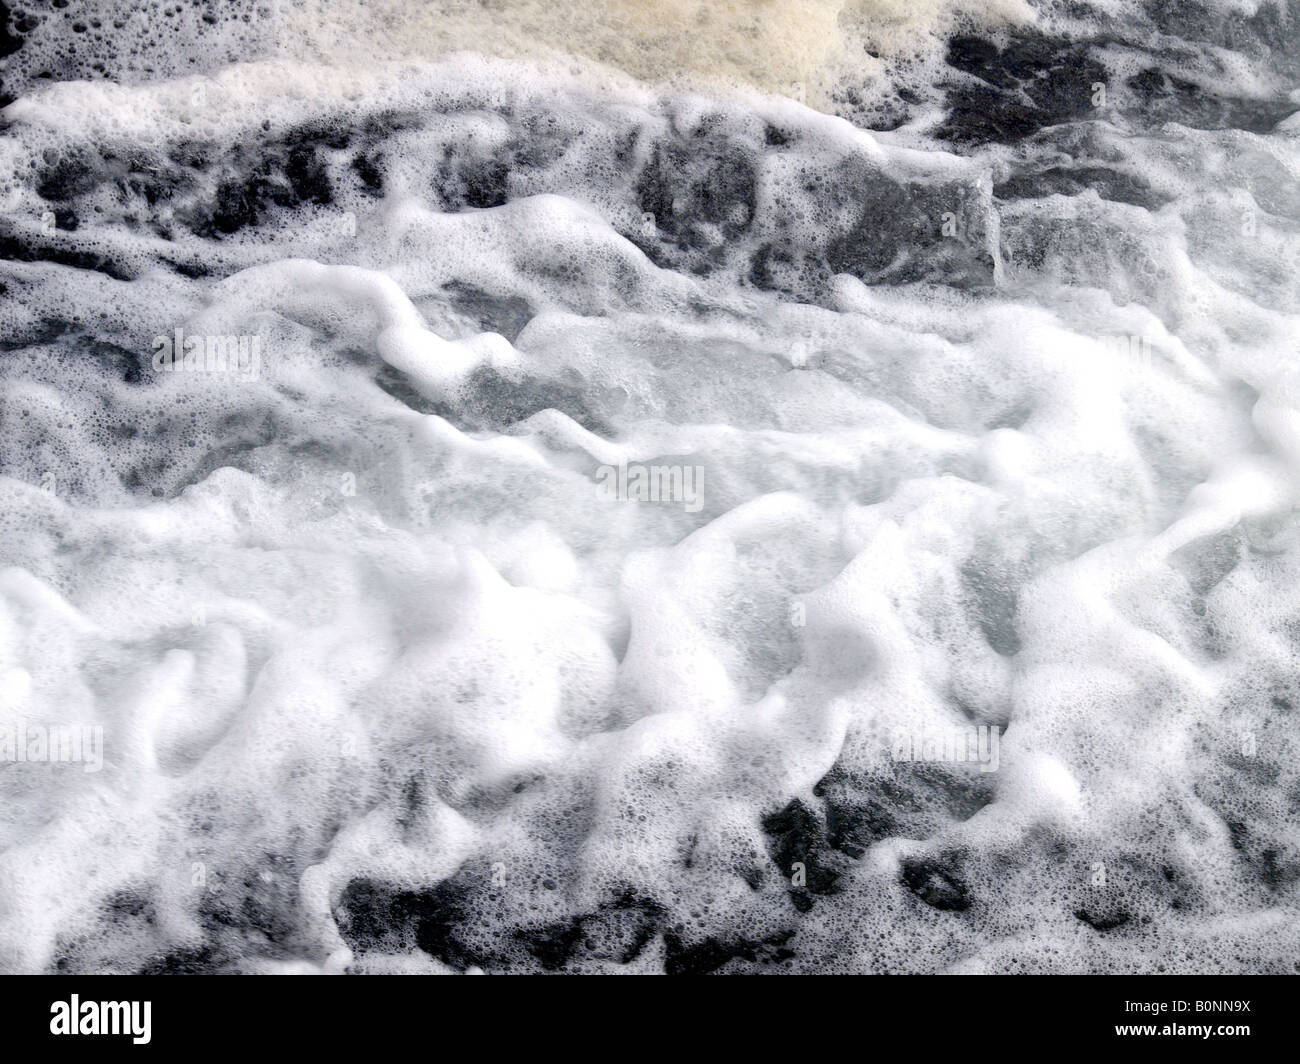 Fast flowing water, foaming into white wash Stock Photo